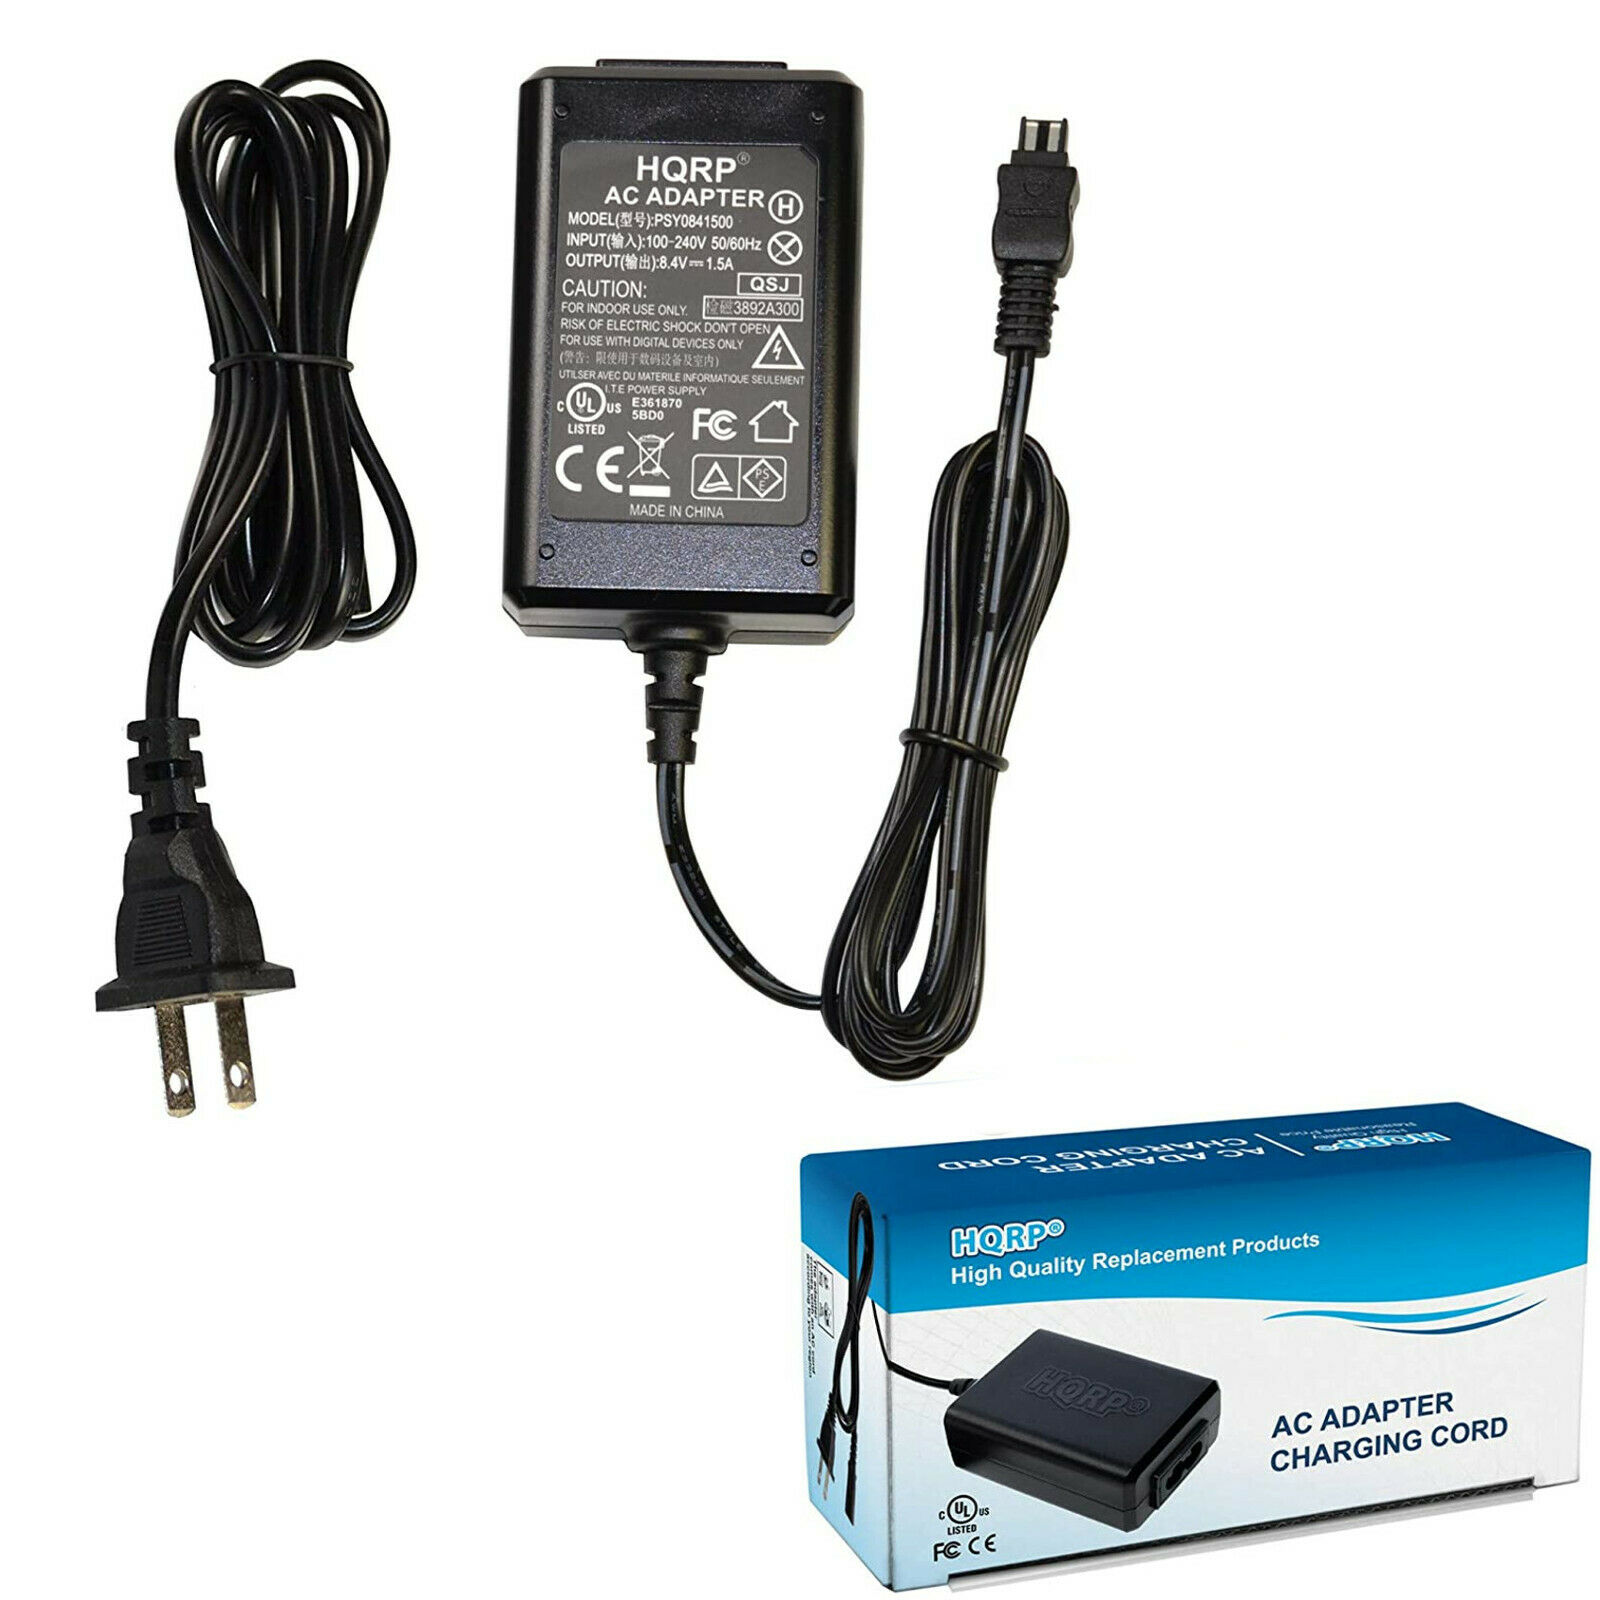 AC Adapter Charger for Sony HandyCam DCR-SR42A DCR-SR45 DCR-SR47 DCR-SR68 To Fit: Camcorder Compatible Brand: For Son - Click Image to Close